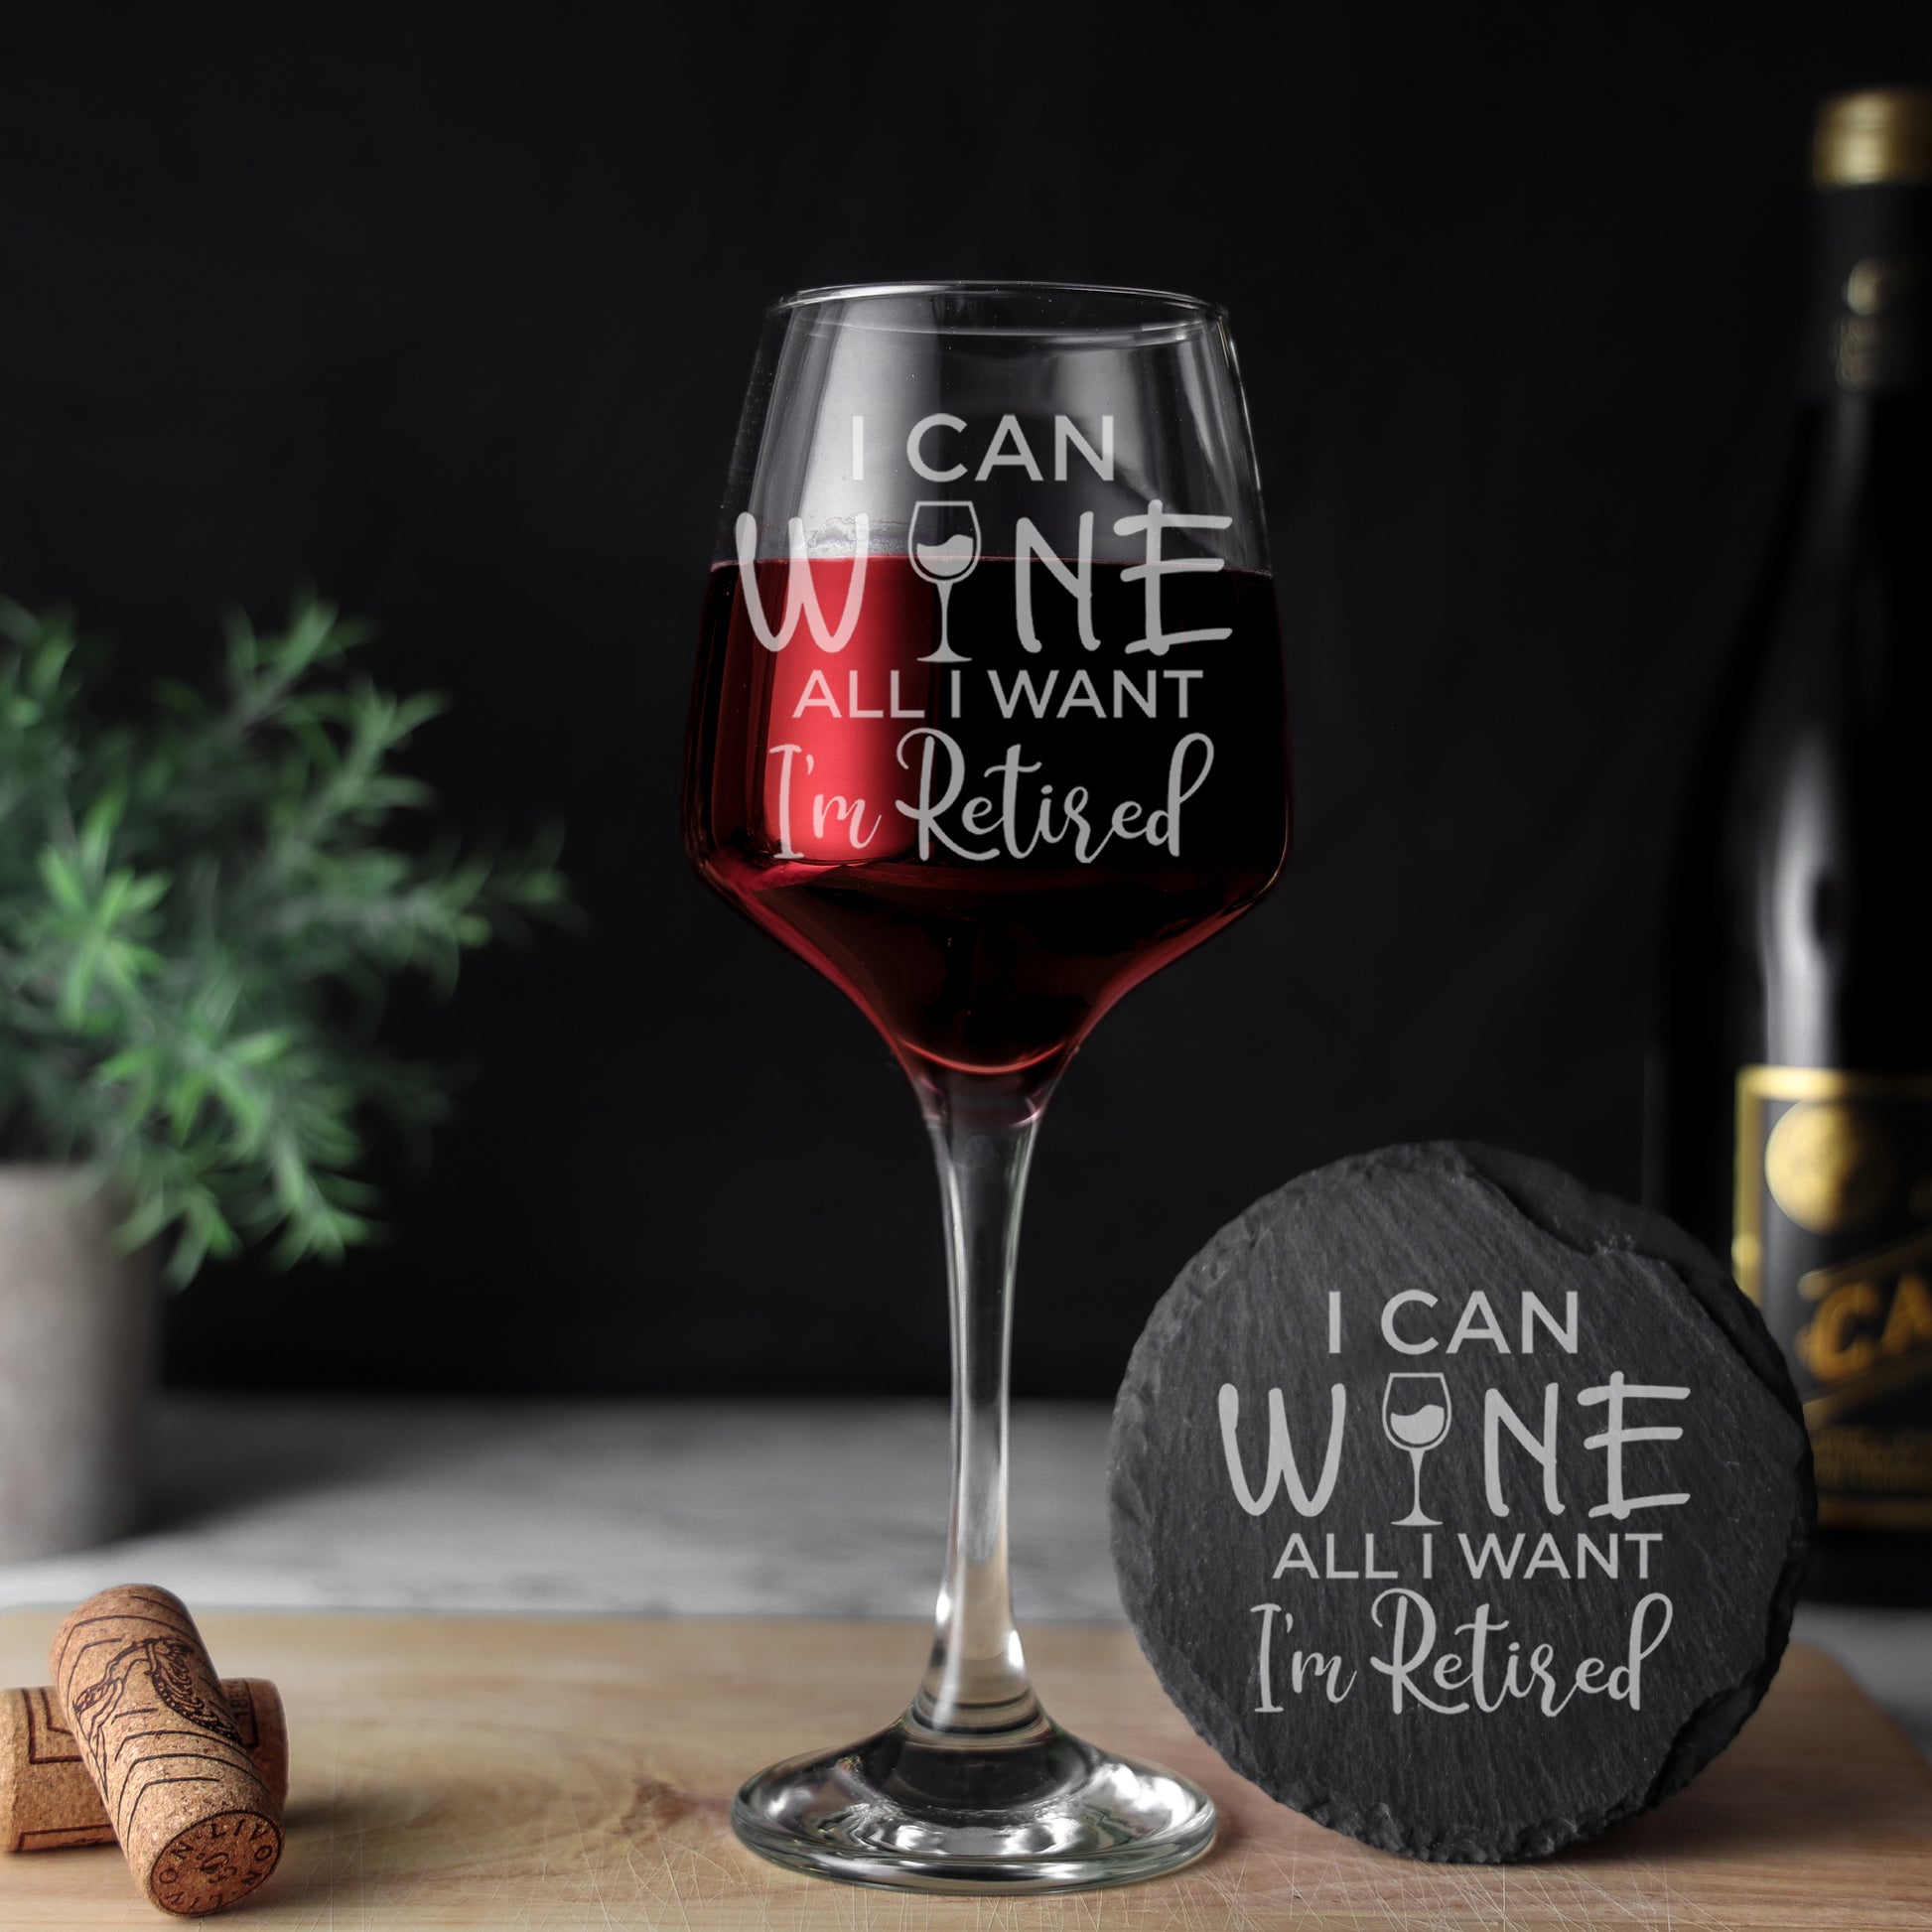 Engraved "I can wine all I want I'm retired" Funny Retirements and/or Coaster Novelty Gift  - Always Looking Good - Glass & Round Coaster  